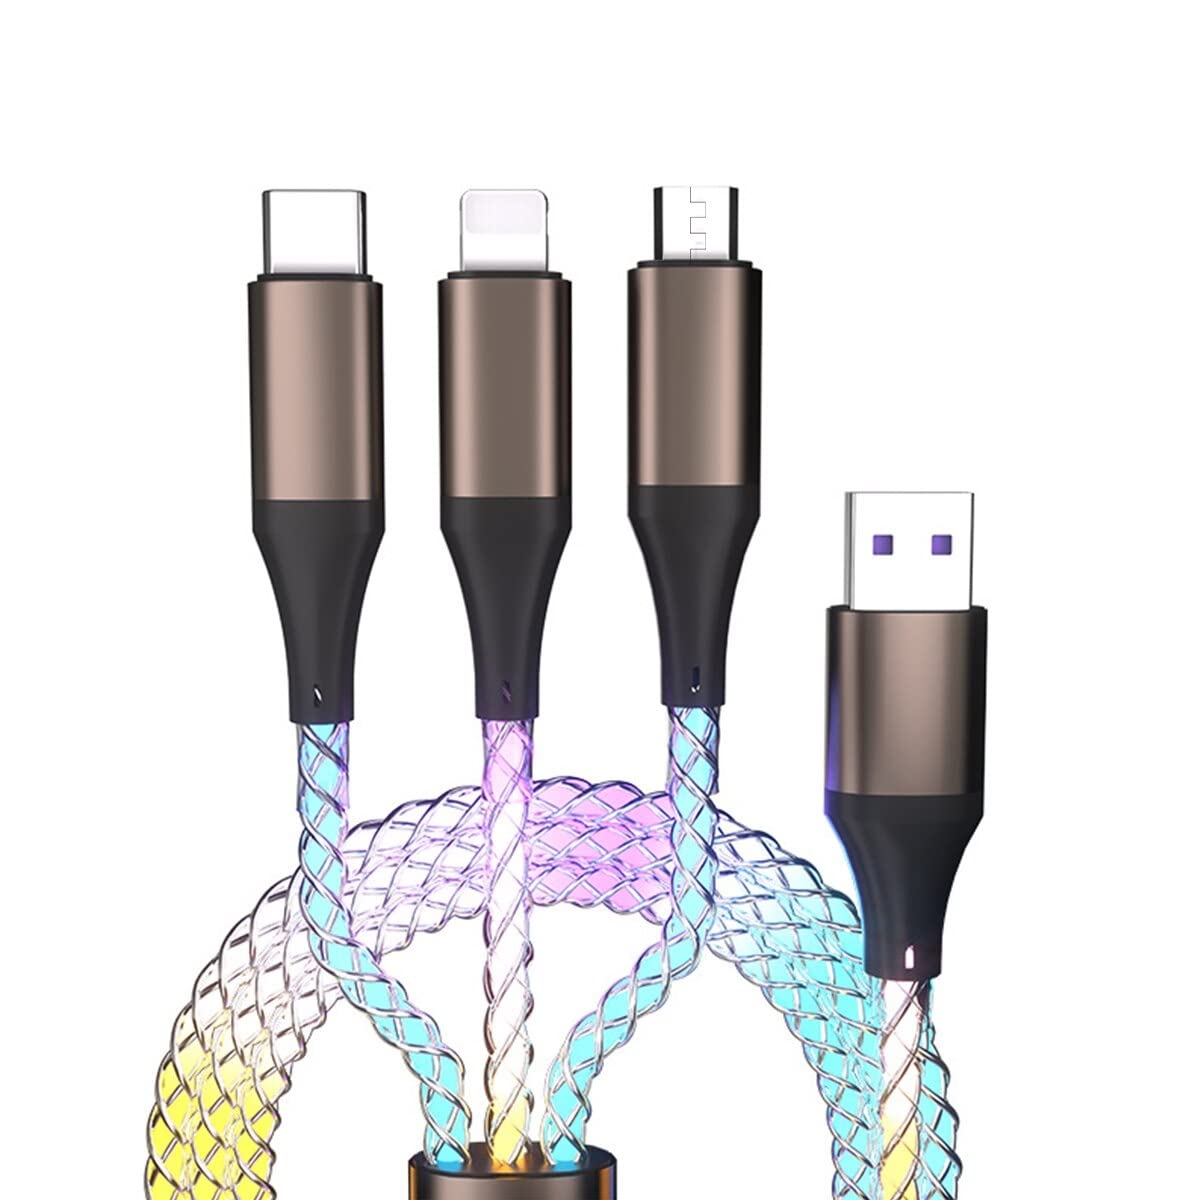 VicRole 3 in 1 Multi LED Charging Cable, Light Up [...]